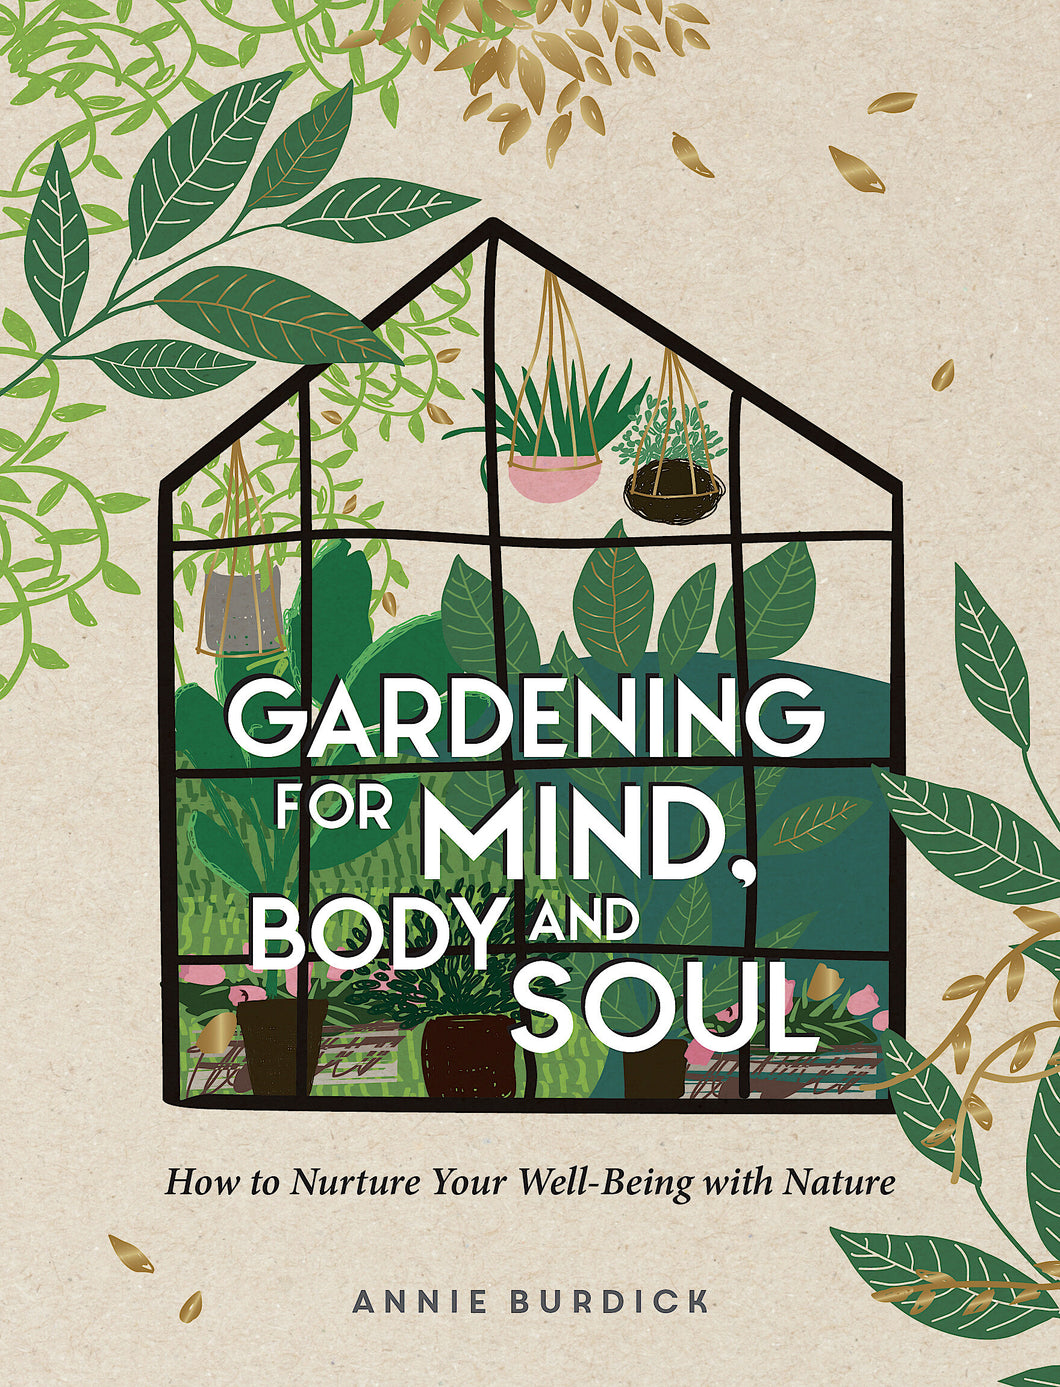 Gardening for Mind, Body, and Soul